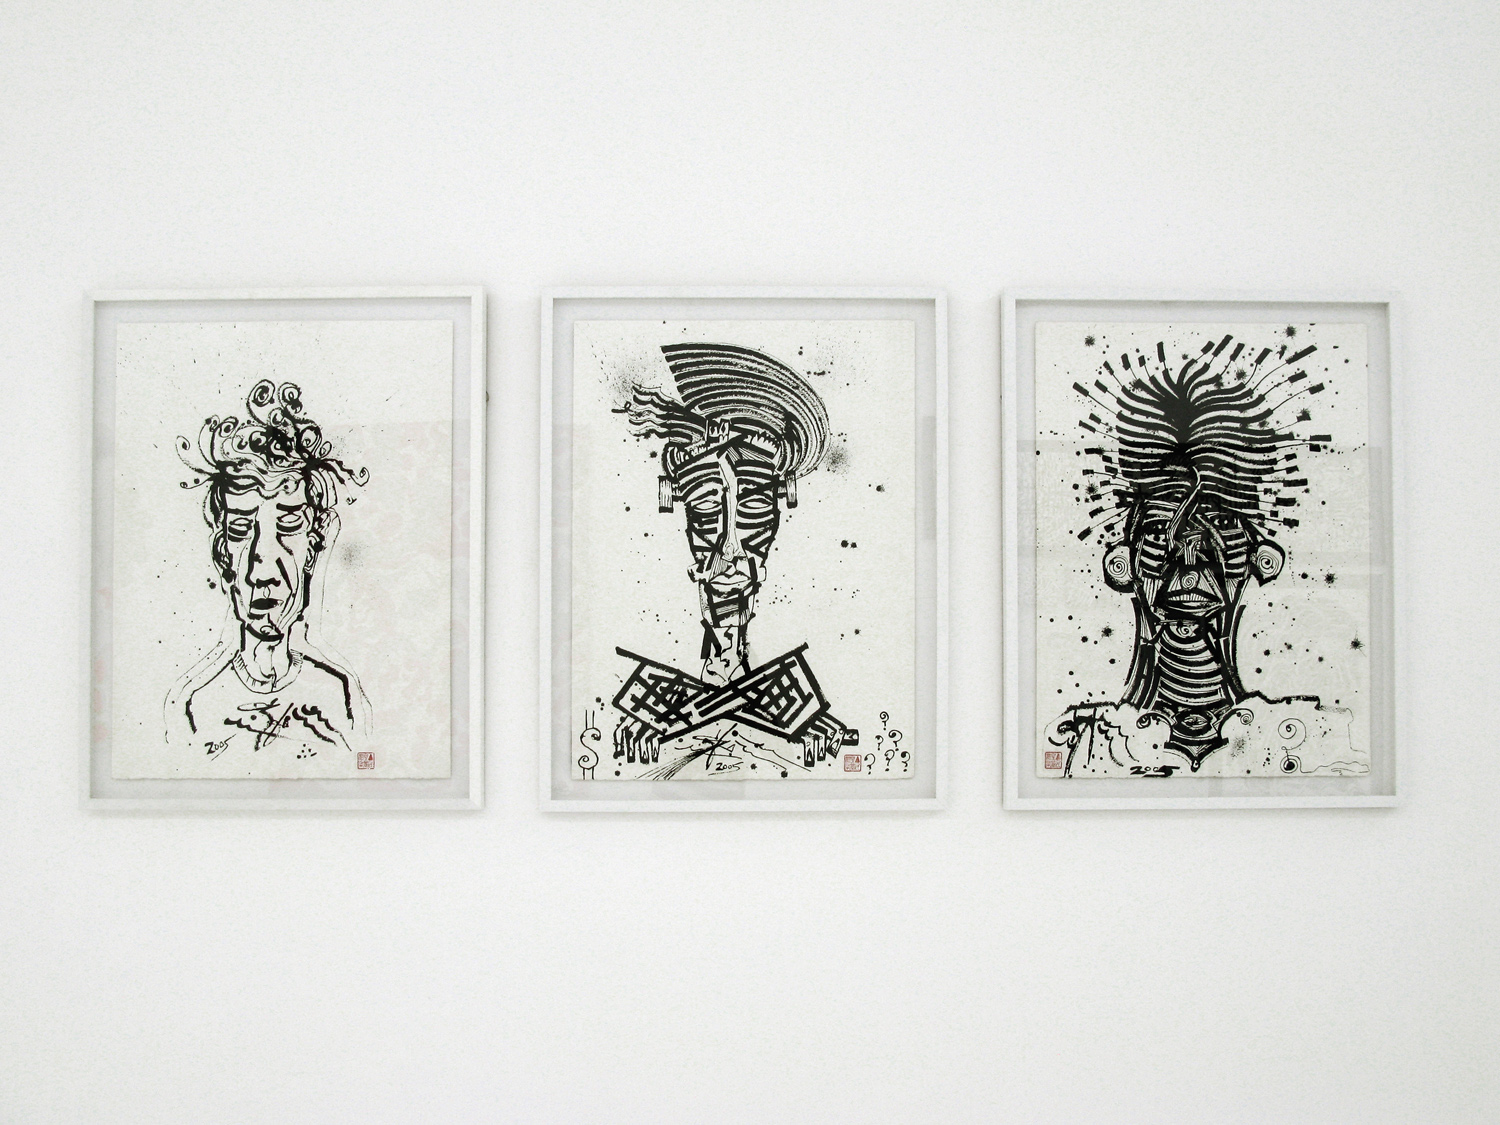  installation view, 3 Shades of Madness (series), 2005 